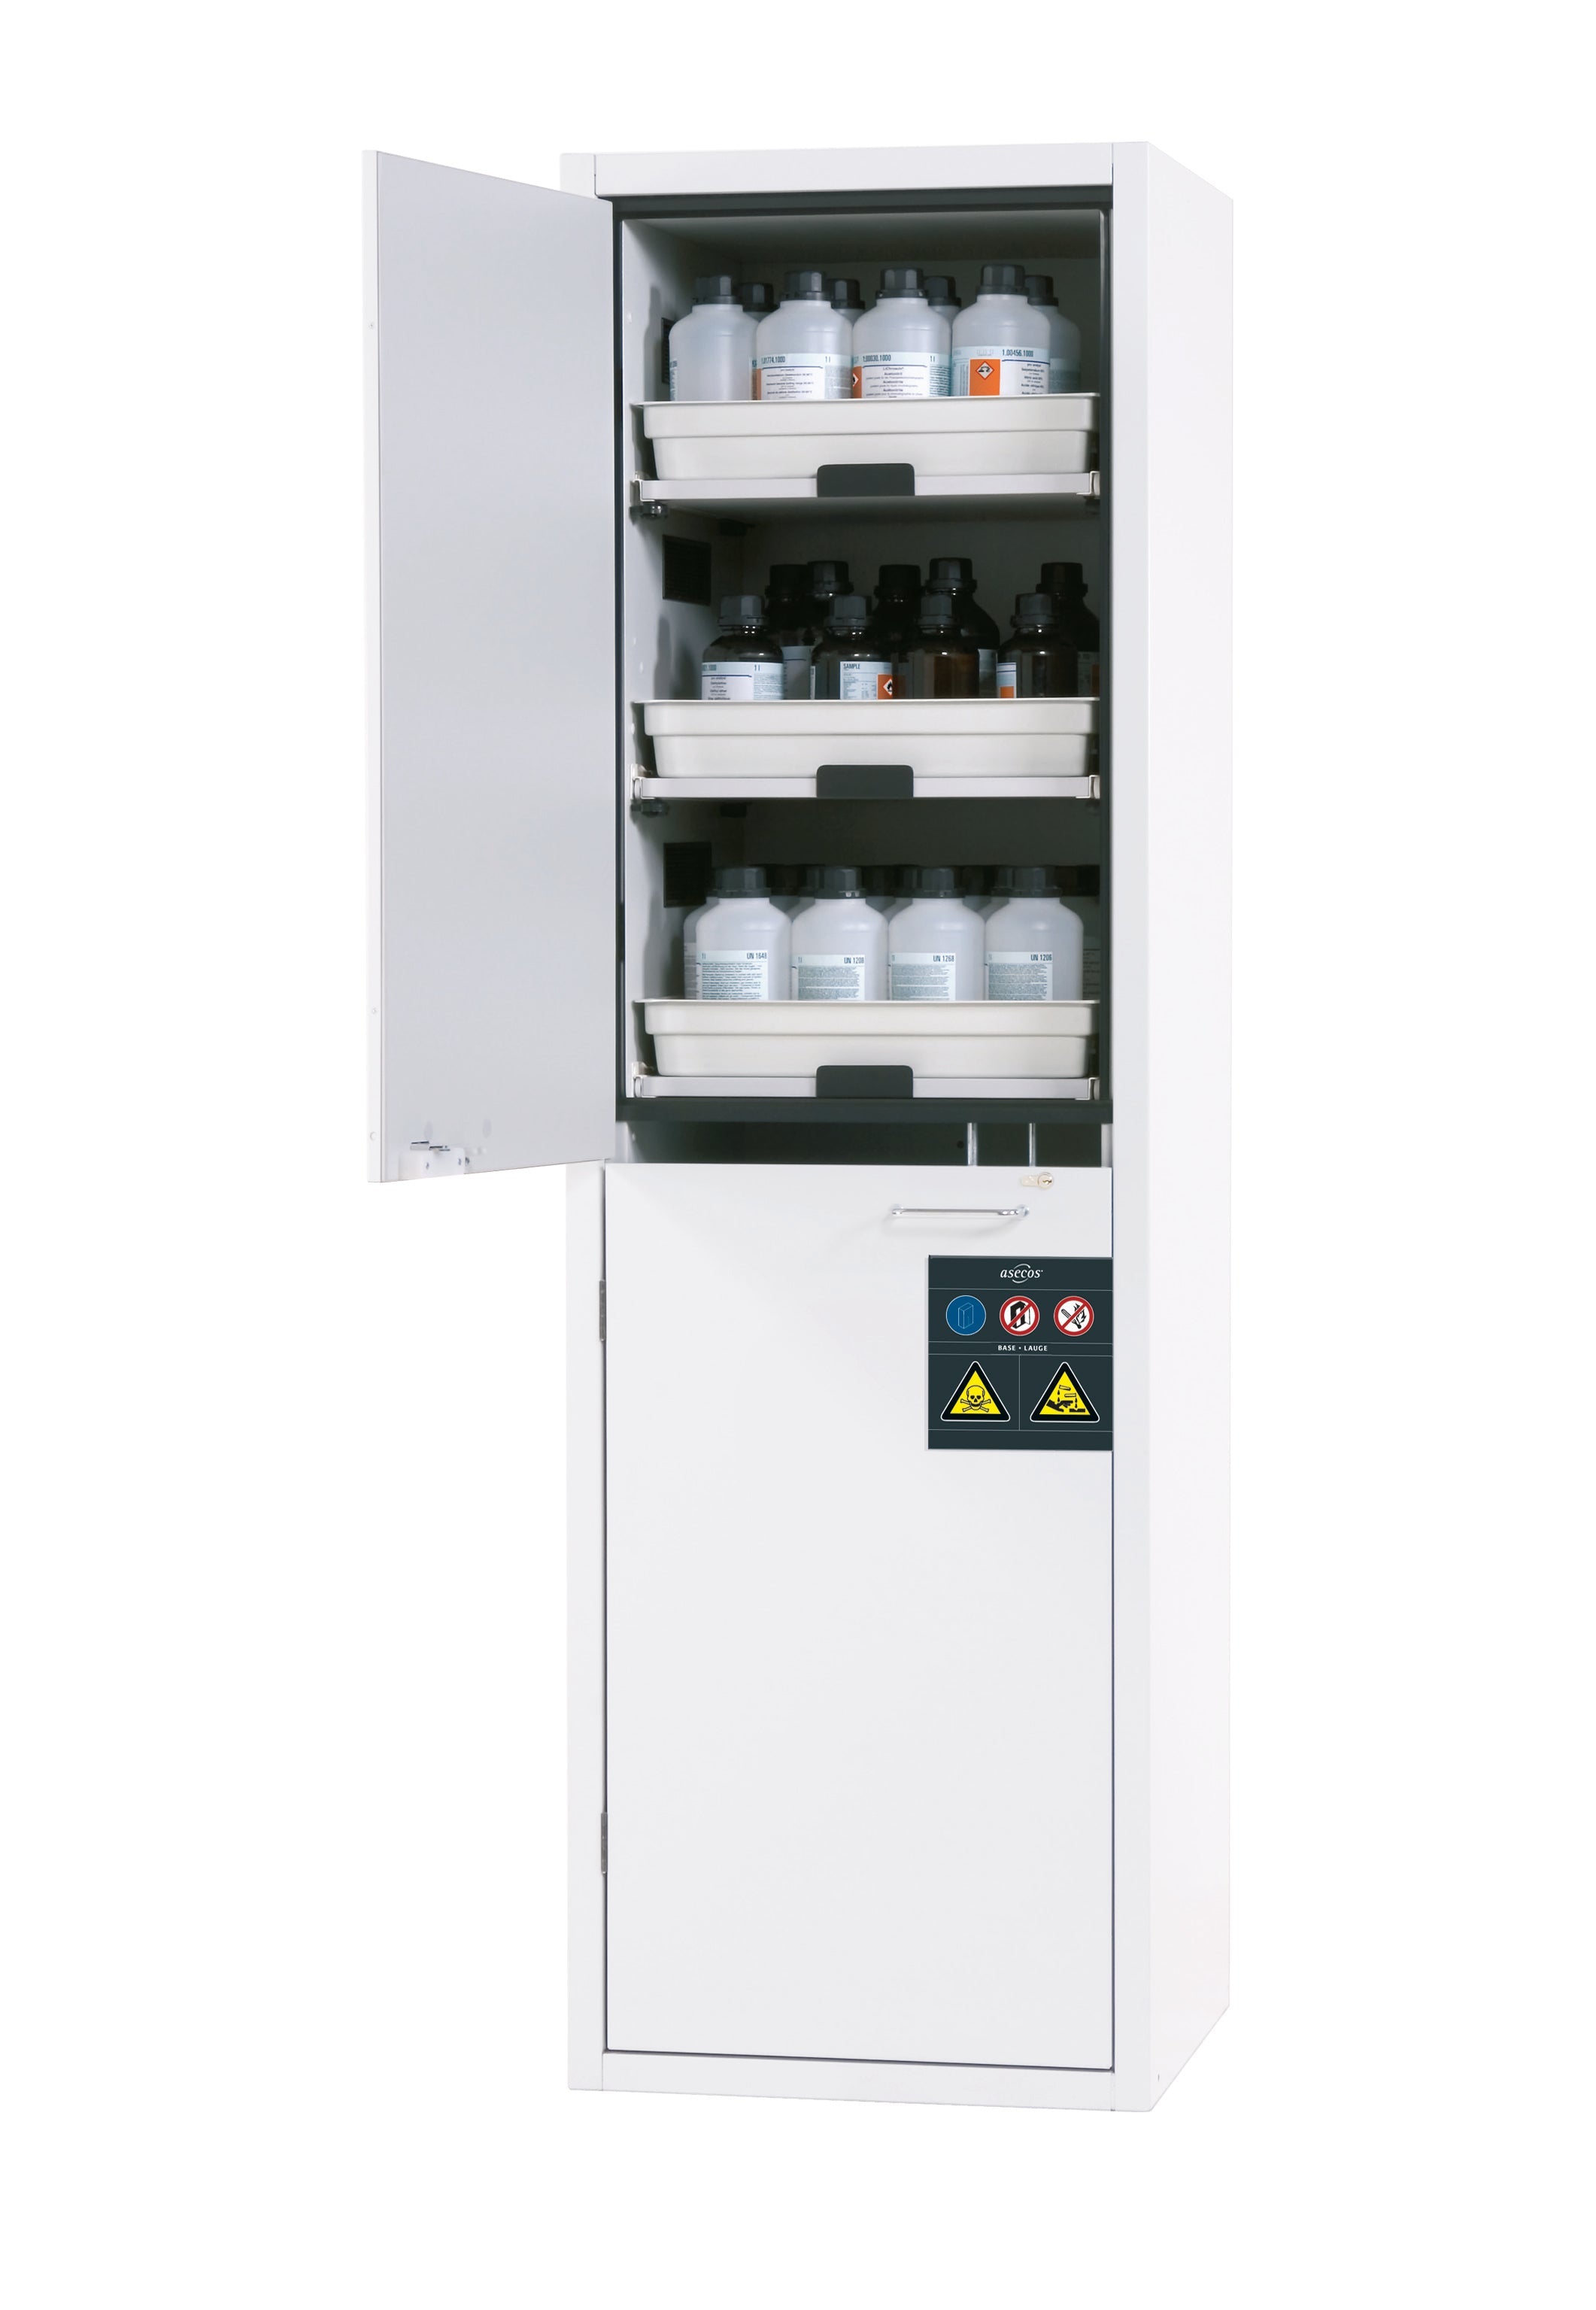 Acid and alkaline cabinet SL-CLASSIC model SL.196.060.MH.R in laboratory white (similar to RAL 9016) with 6x AbZ pull-out shelves (FP plate/polypropylene)